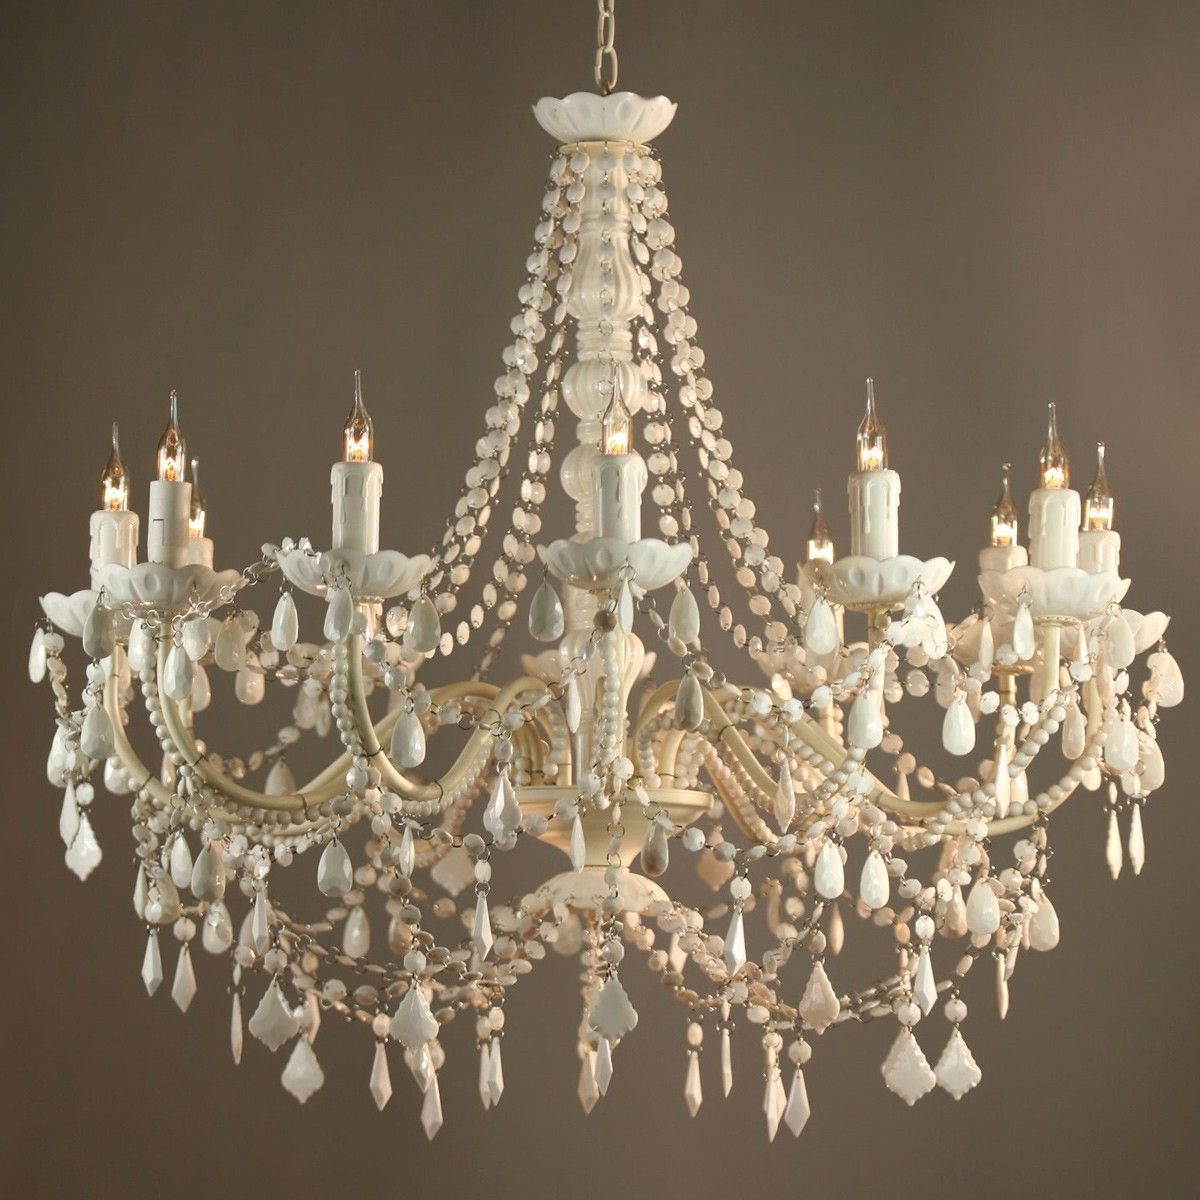 Vintage Chandelier Beautiful Home Design Pertaining To Vintage Style Chandelier (Photo 1 of 12)